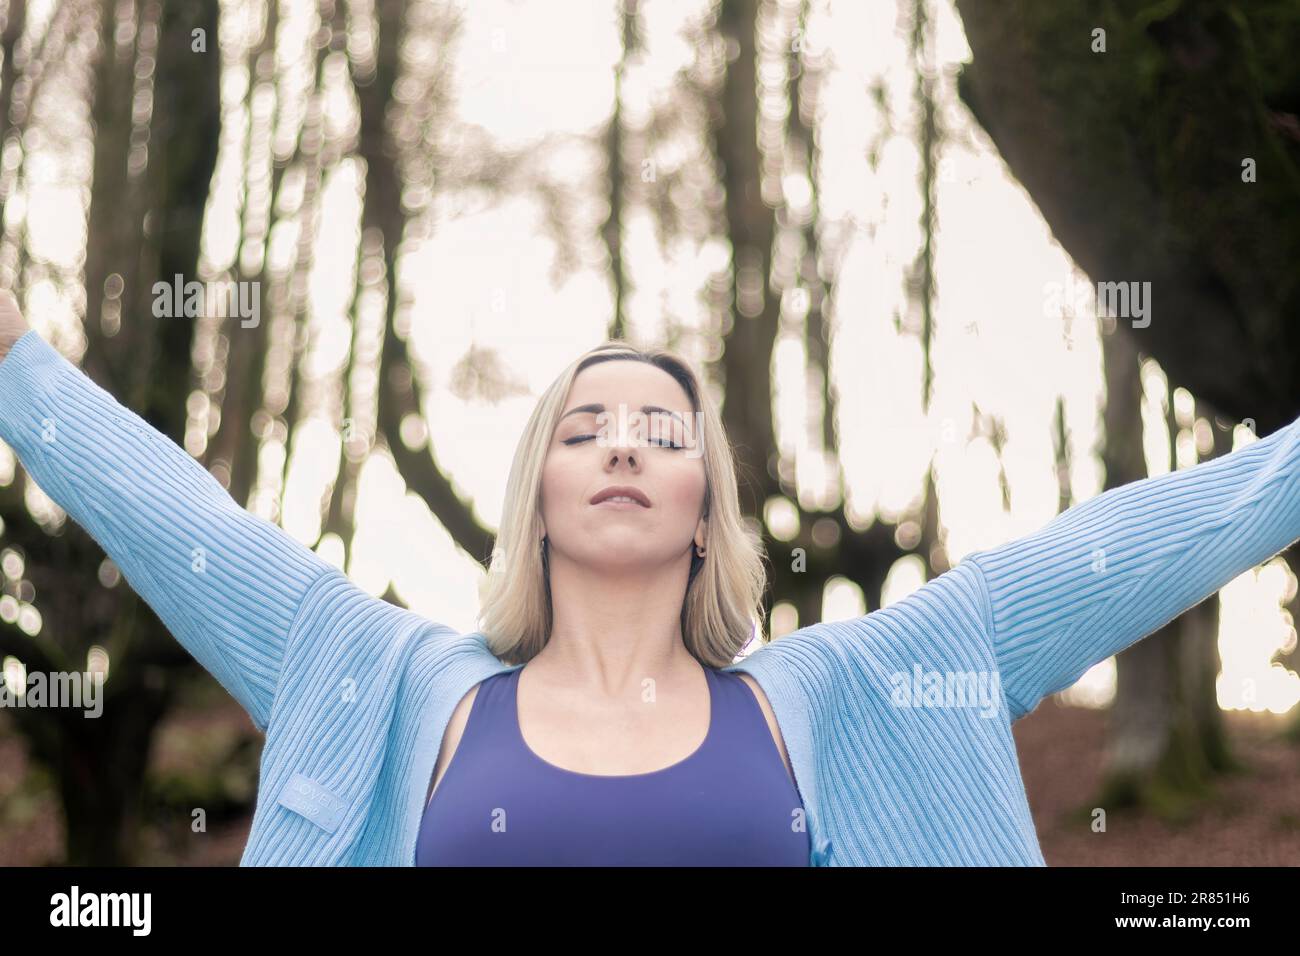 Forest Renewal: Blonde Woman Embracing Inner Peace Through Deep Breathing in Nature Stock Photo